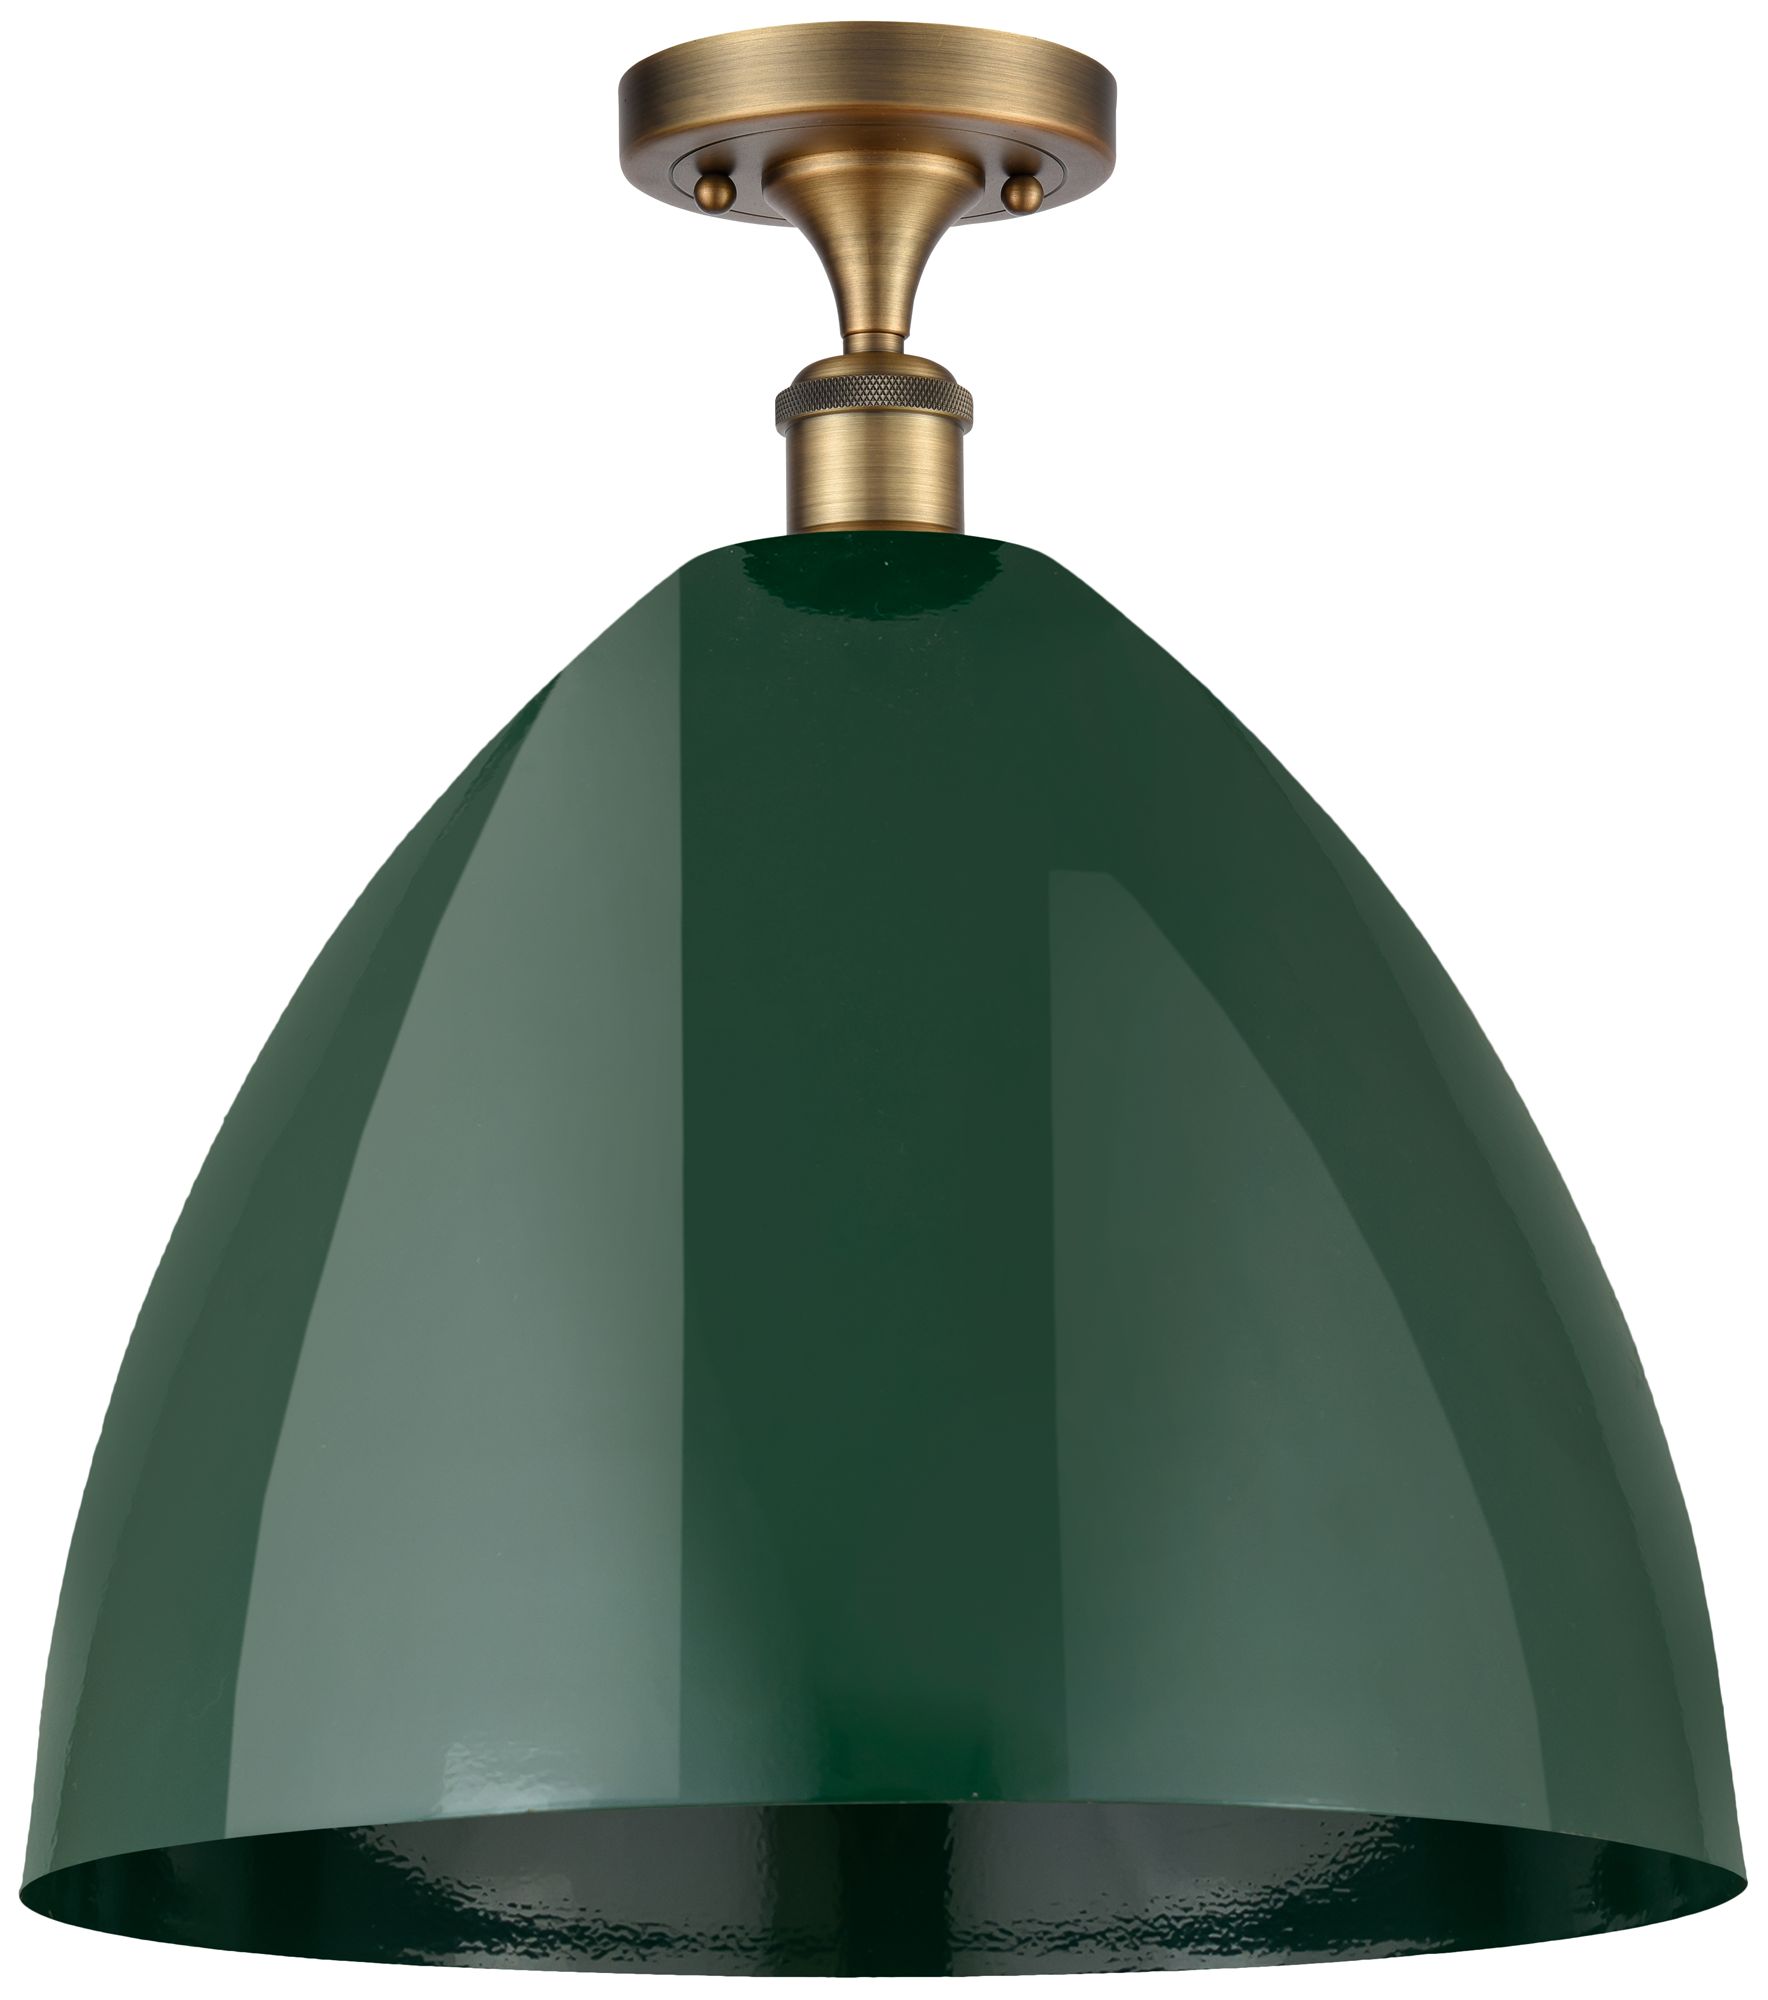 Plymouth Dome 16" Wide Brushed Brass Semi Flush Mount w/ Green Shade